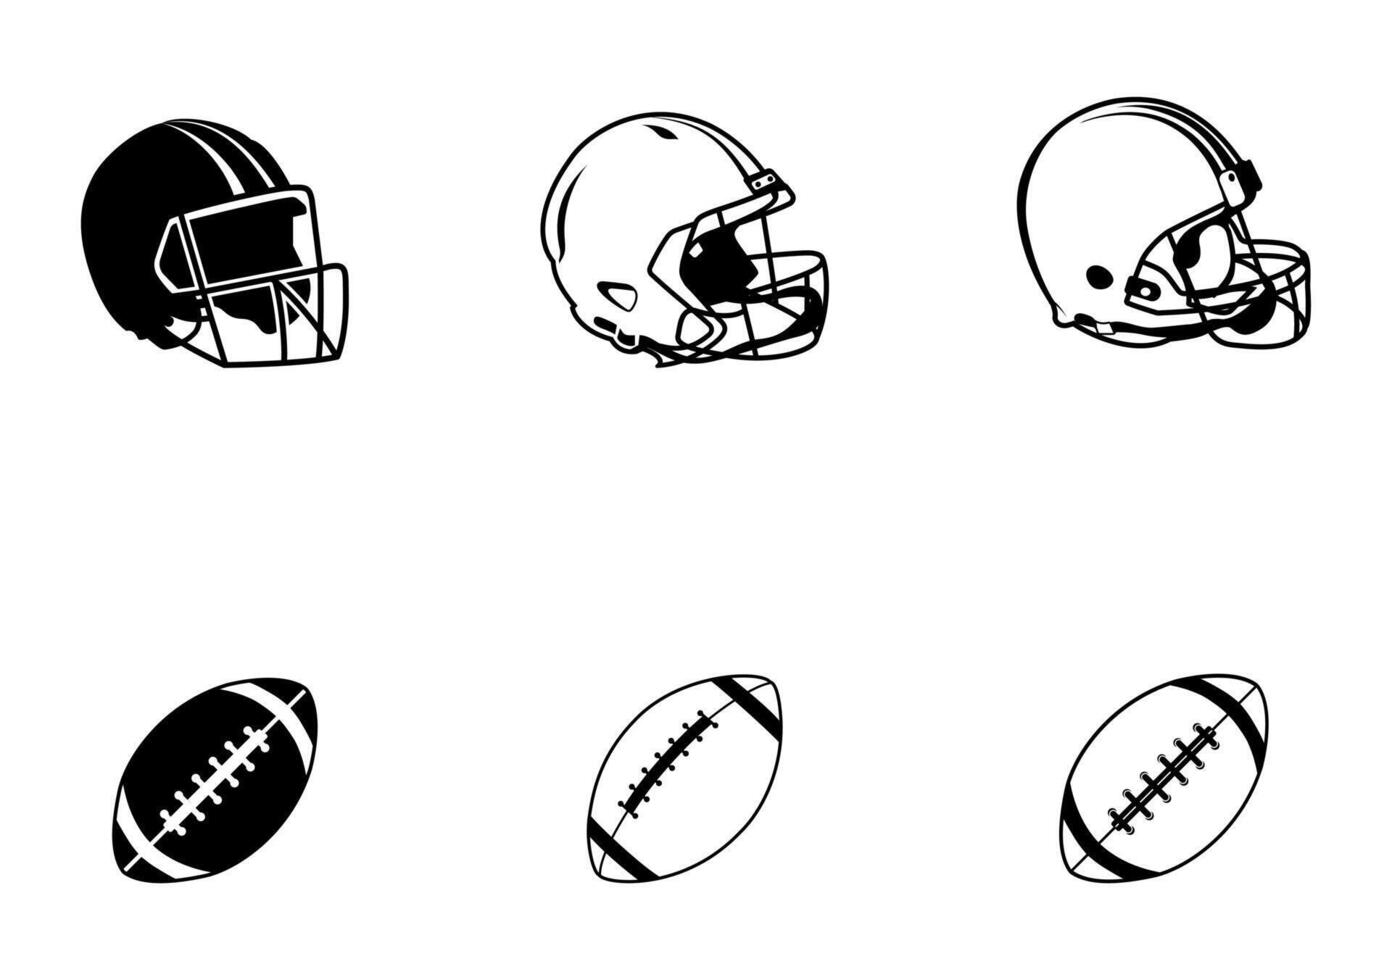 American Football Illustrations Vector Elements With Clip Art. American Sport competition Ball Element.